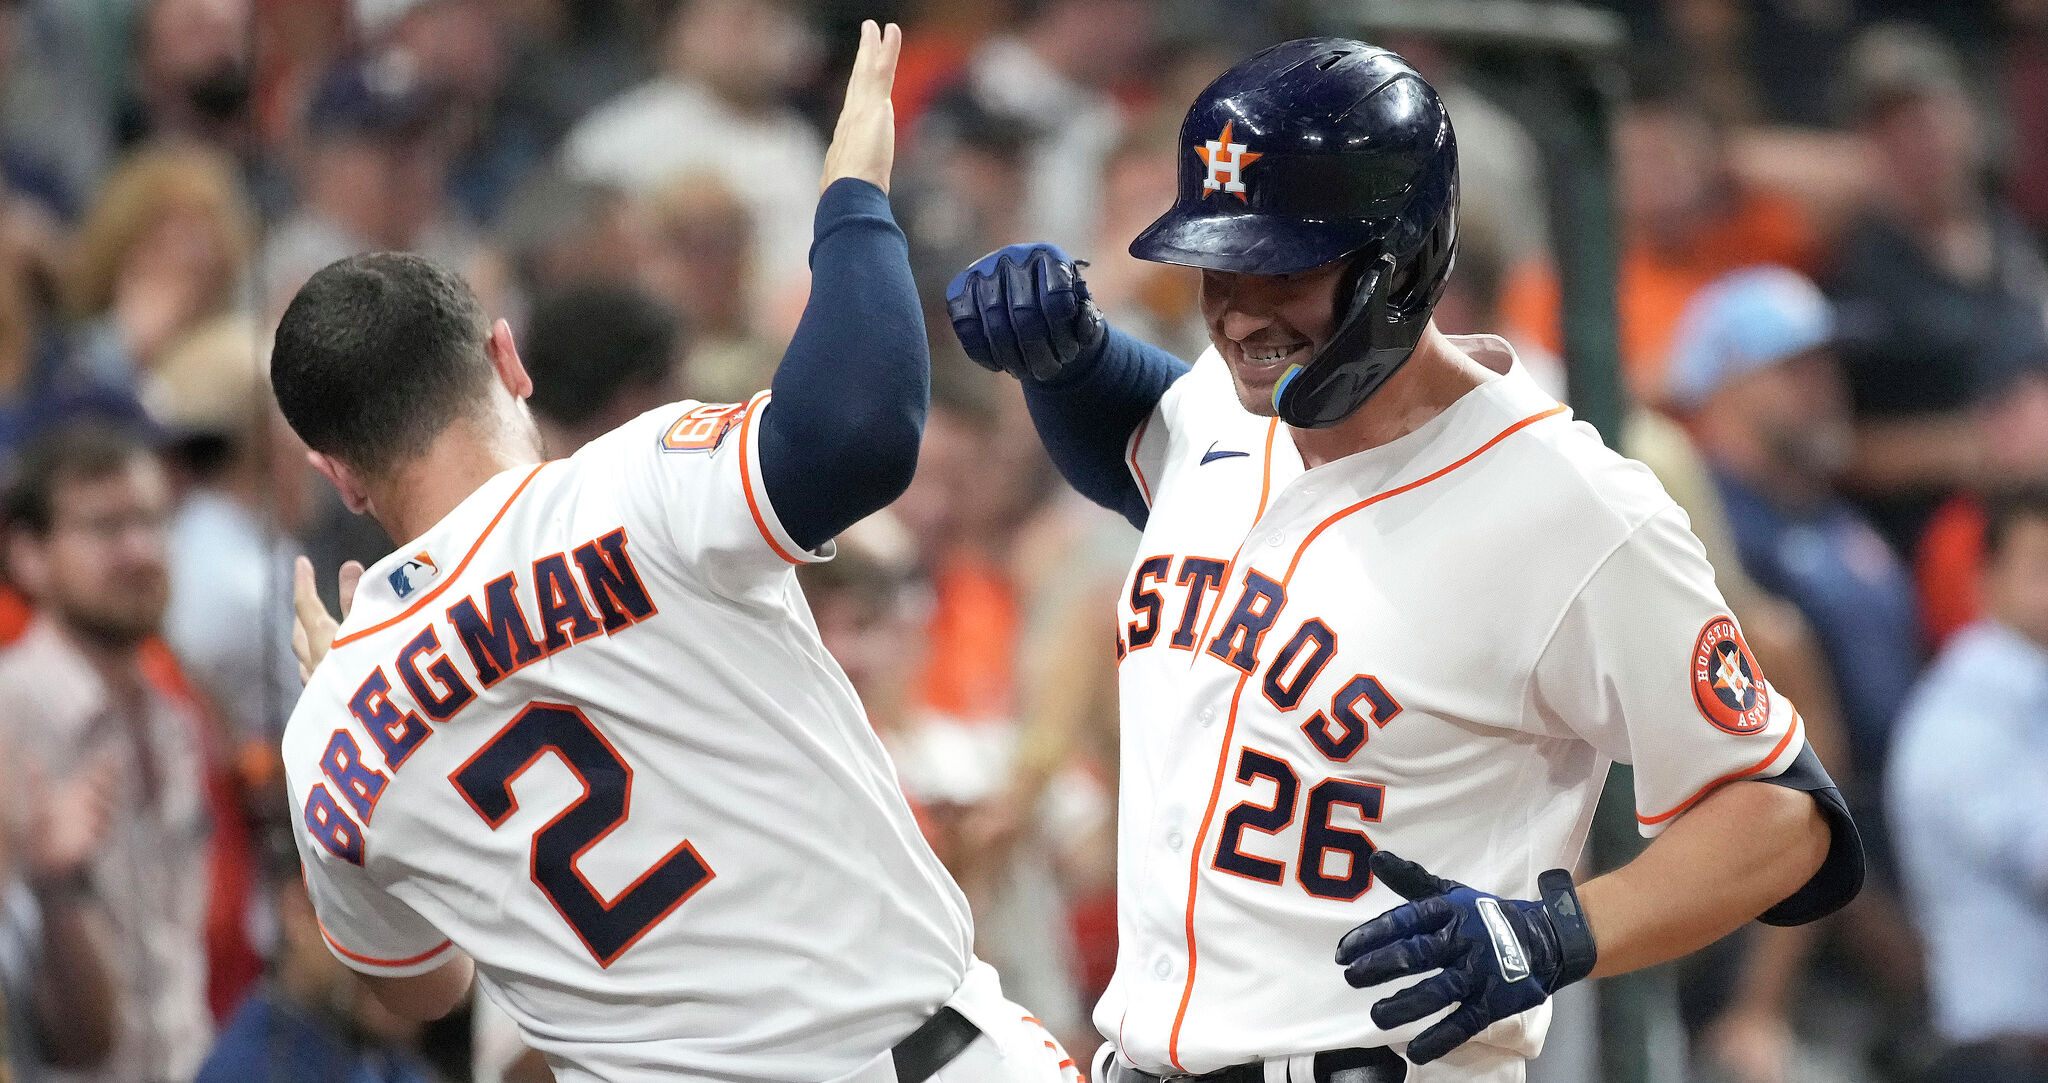 Mancini hits HR in first start with Houston Astros - CBS Baltimore